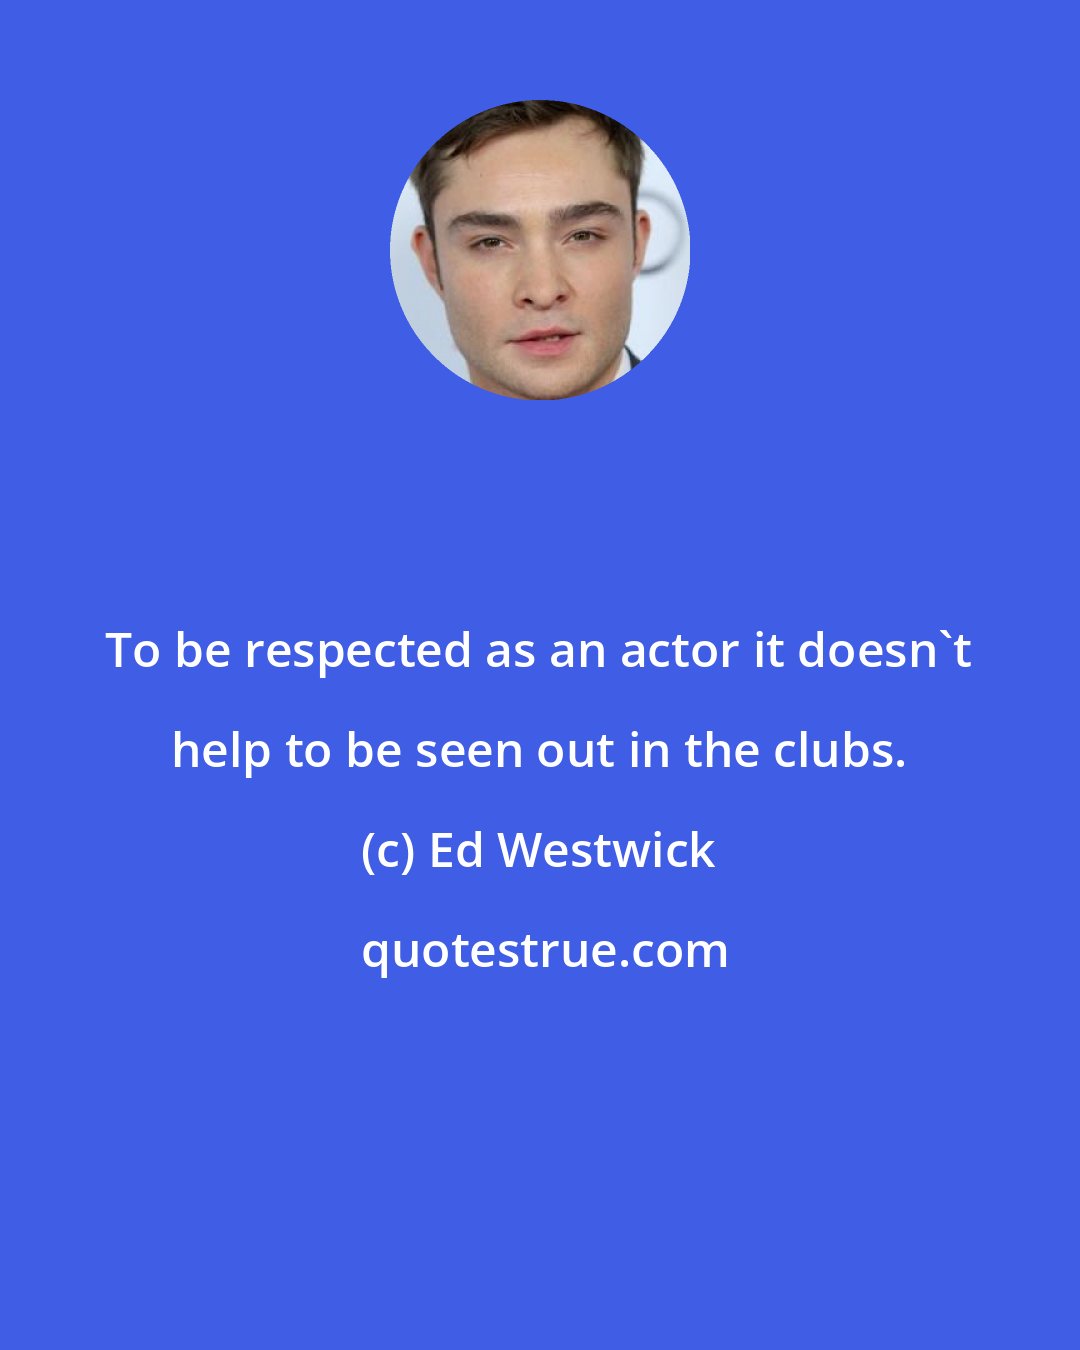 Ed Westwick: To be respected as an actor it doesn't help to be seen out in the clubs.